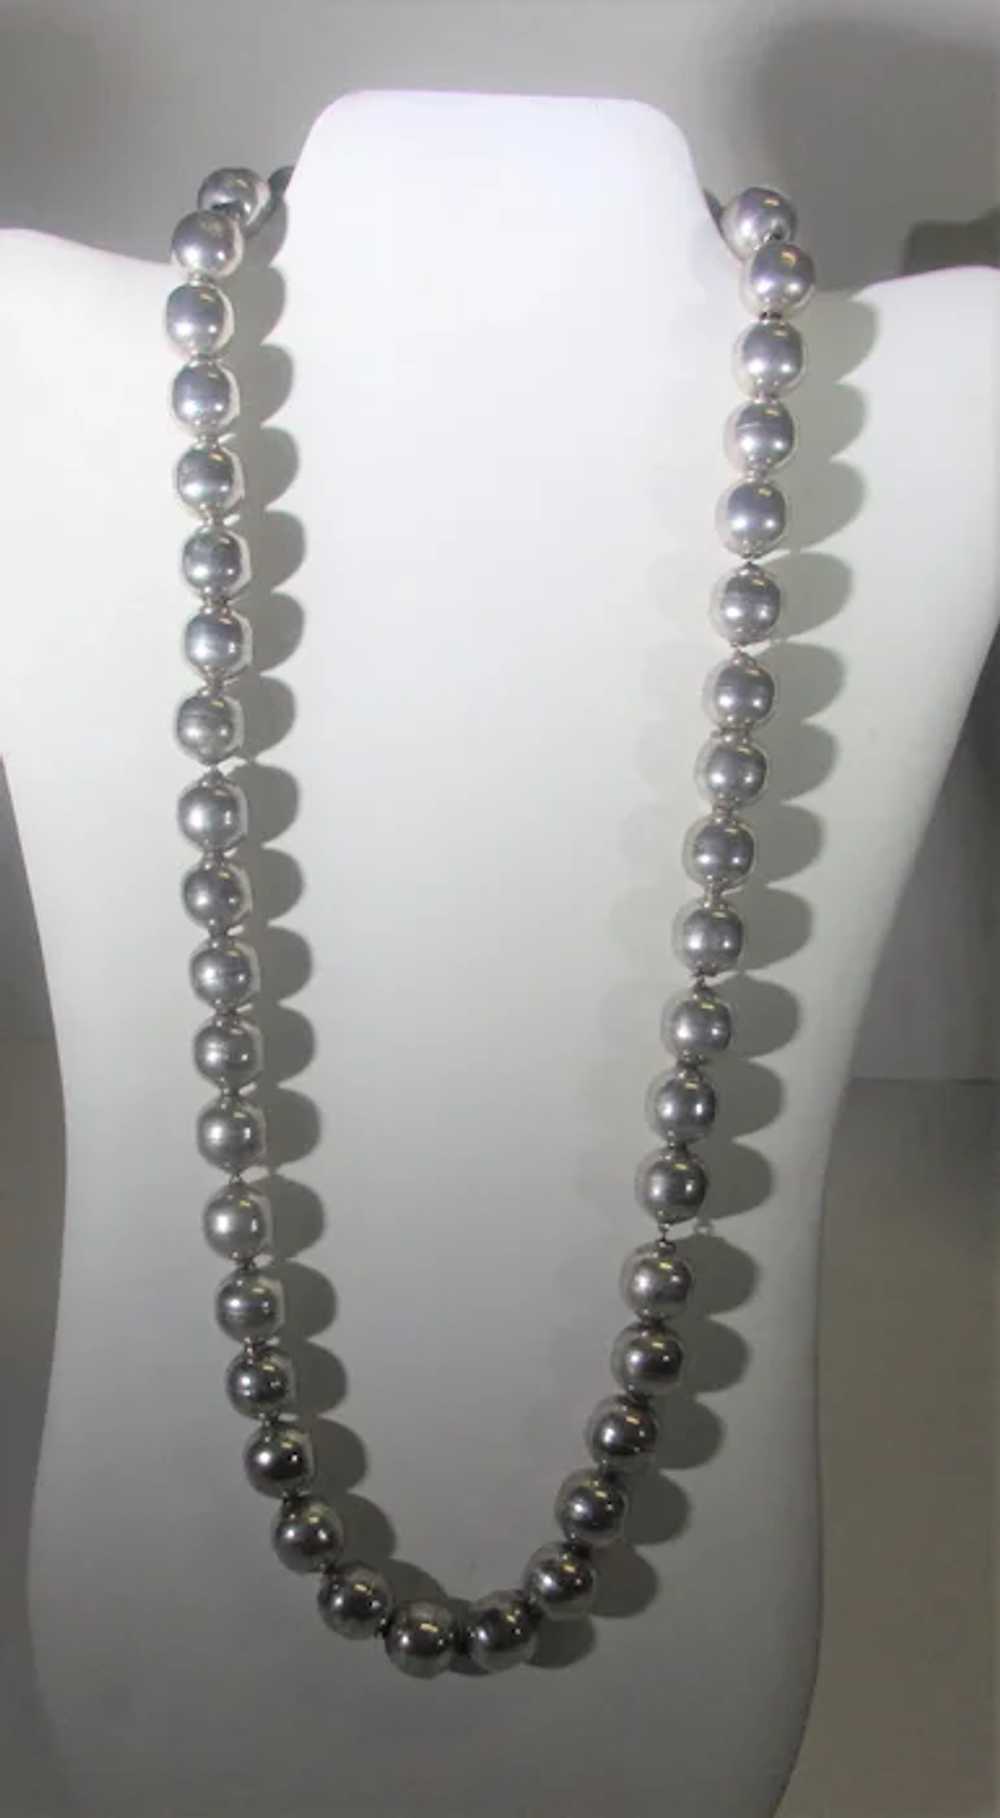 Vintage Silver Tone Beads on a Chain by AlPaca - image 2